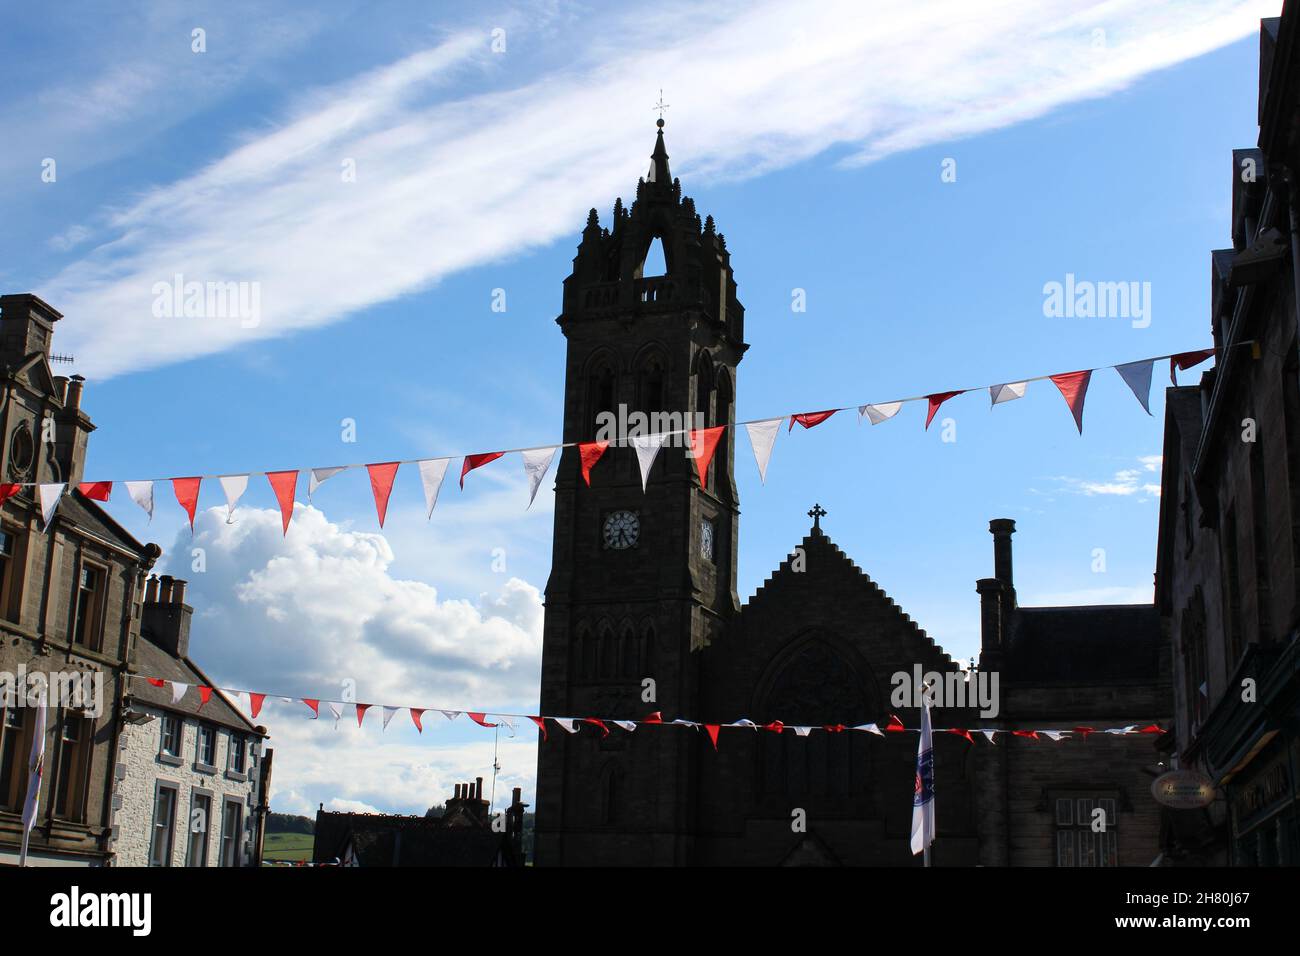 Church tower and banners during Beltane (Peebles, Scotland) Stock Photo